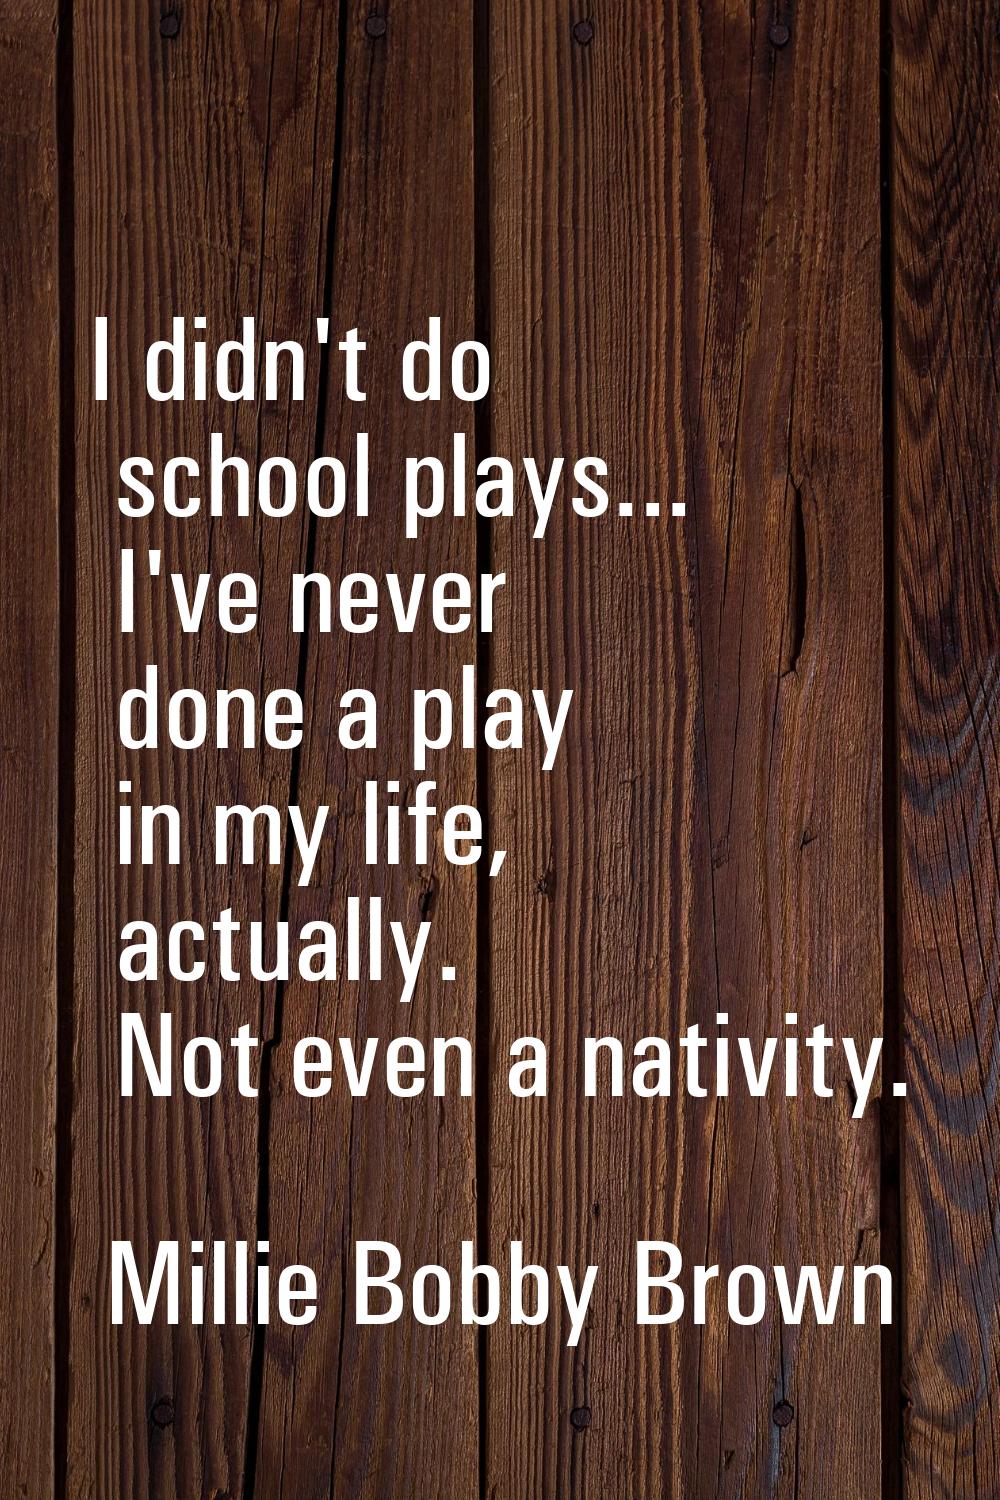 I didn't do school plays... I've never done a play in my life, actually. Not even a nativity.